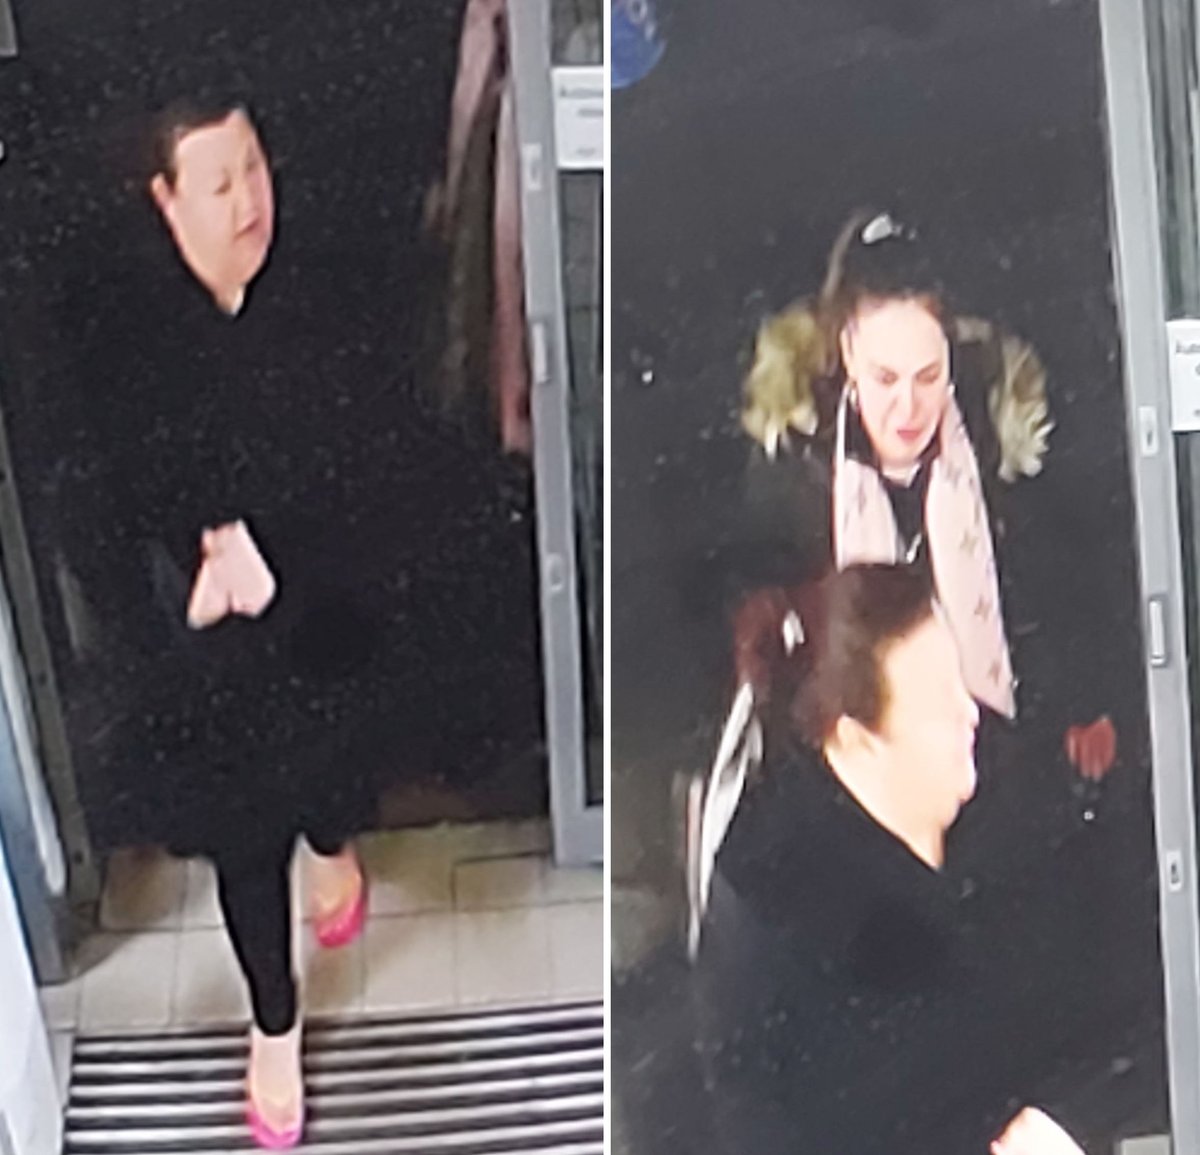 Detectives investigating a suspected theft in #Folkestone have released CCTV images of two women that they would like to speak to in connection with the incident. Can you help? Read more: kent.police.uk/news/kent/late…